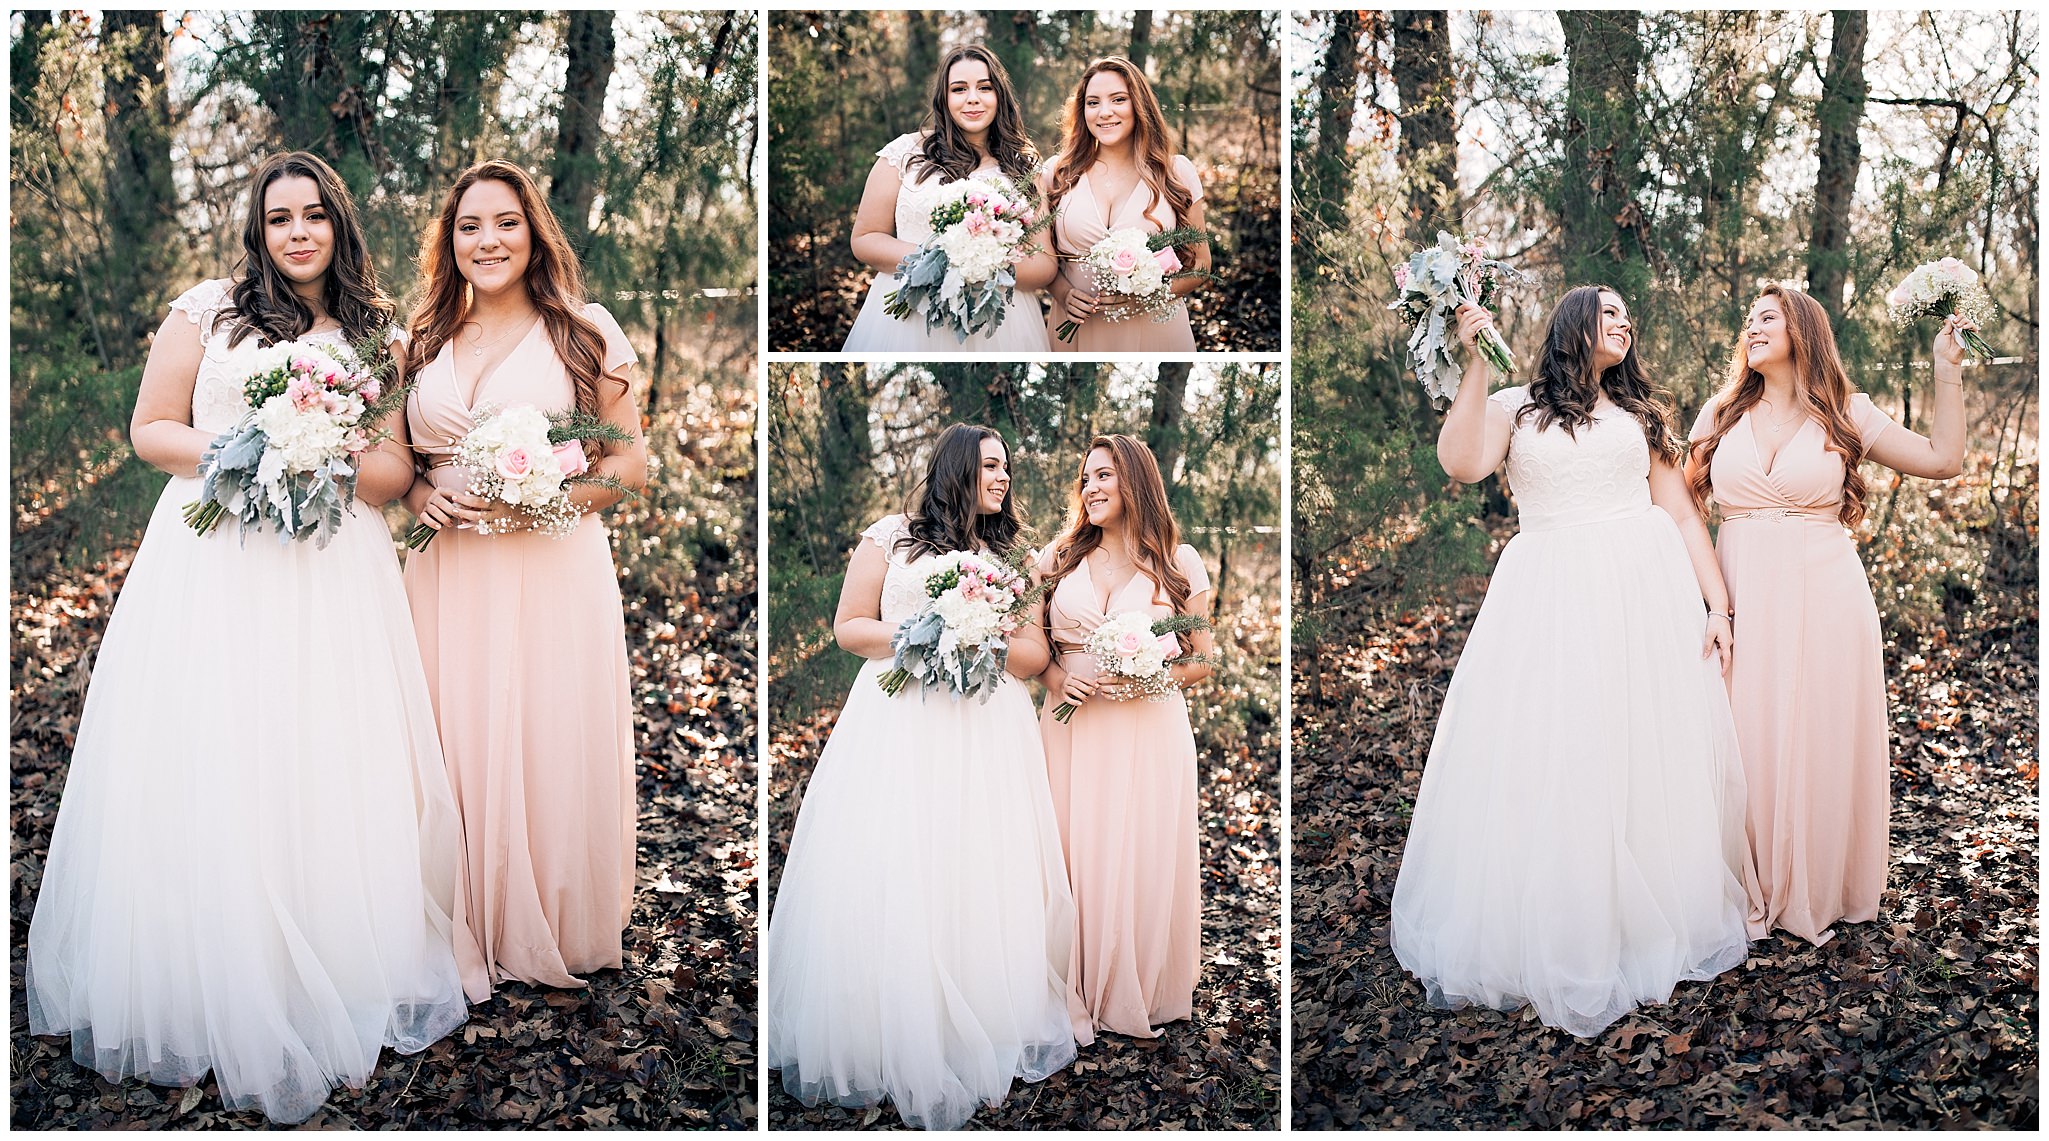 Bride with her bridesmaids who are wearing pink